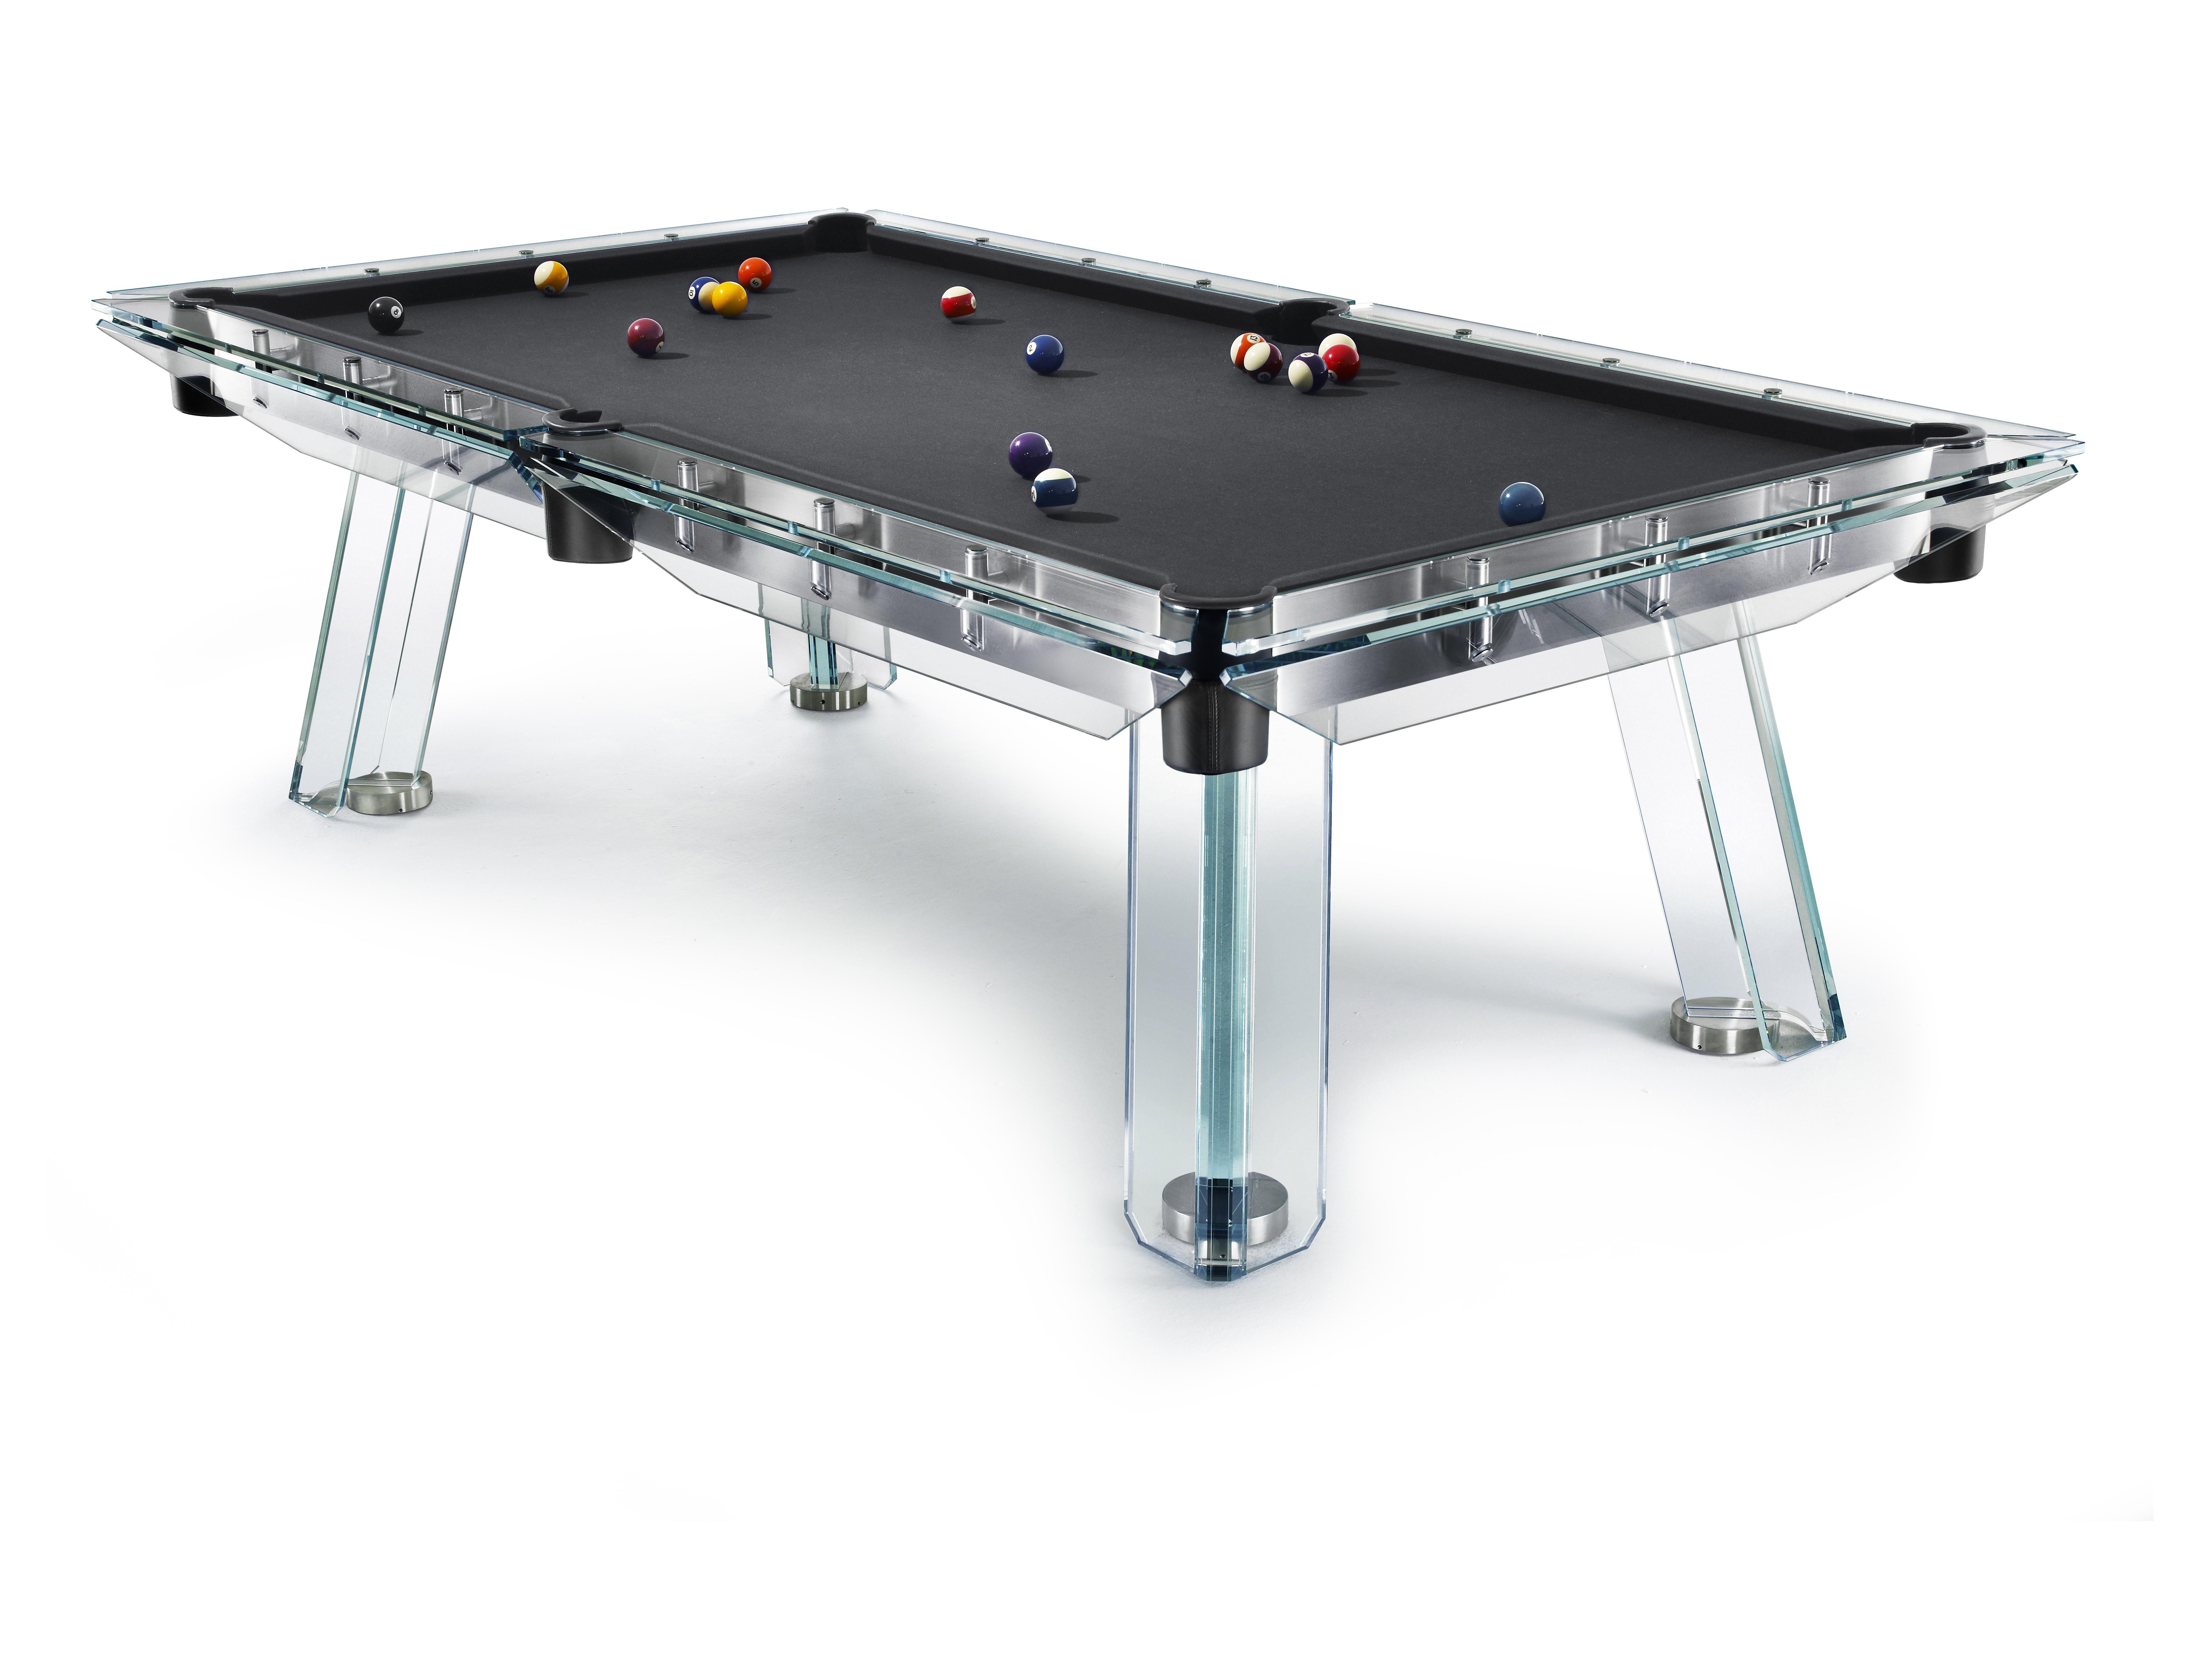 Filotto classic player pool table by Impatia
Dimensions: D 268 x W 152 x H 82 cm
Weight: 640 kg
Material: Simonis cloth frame and legs in low-iron glass, black nickel components, chrome leather pockets.
Also available: Different colours and